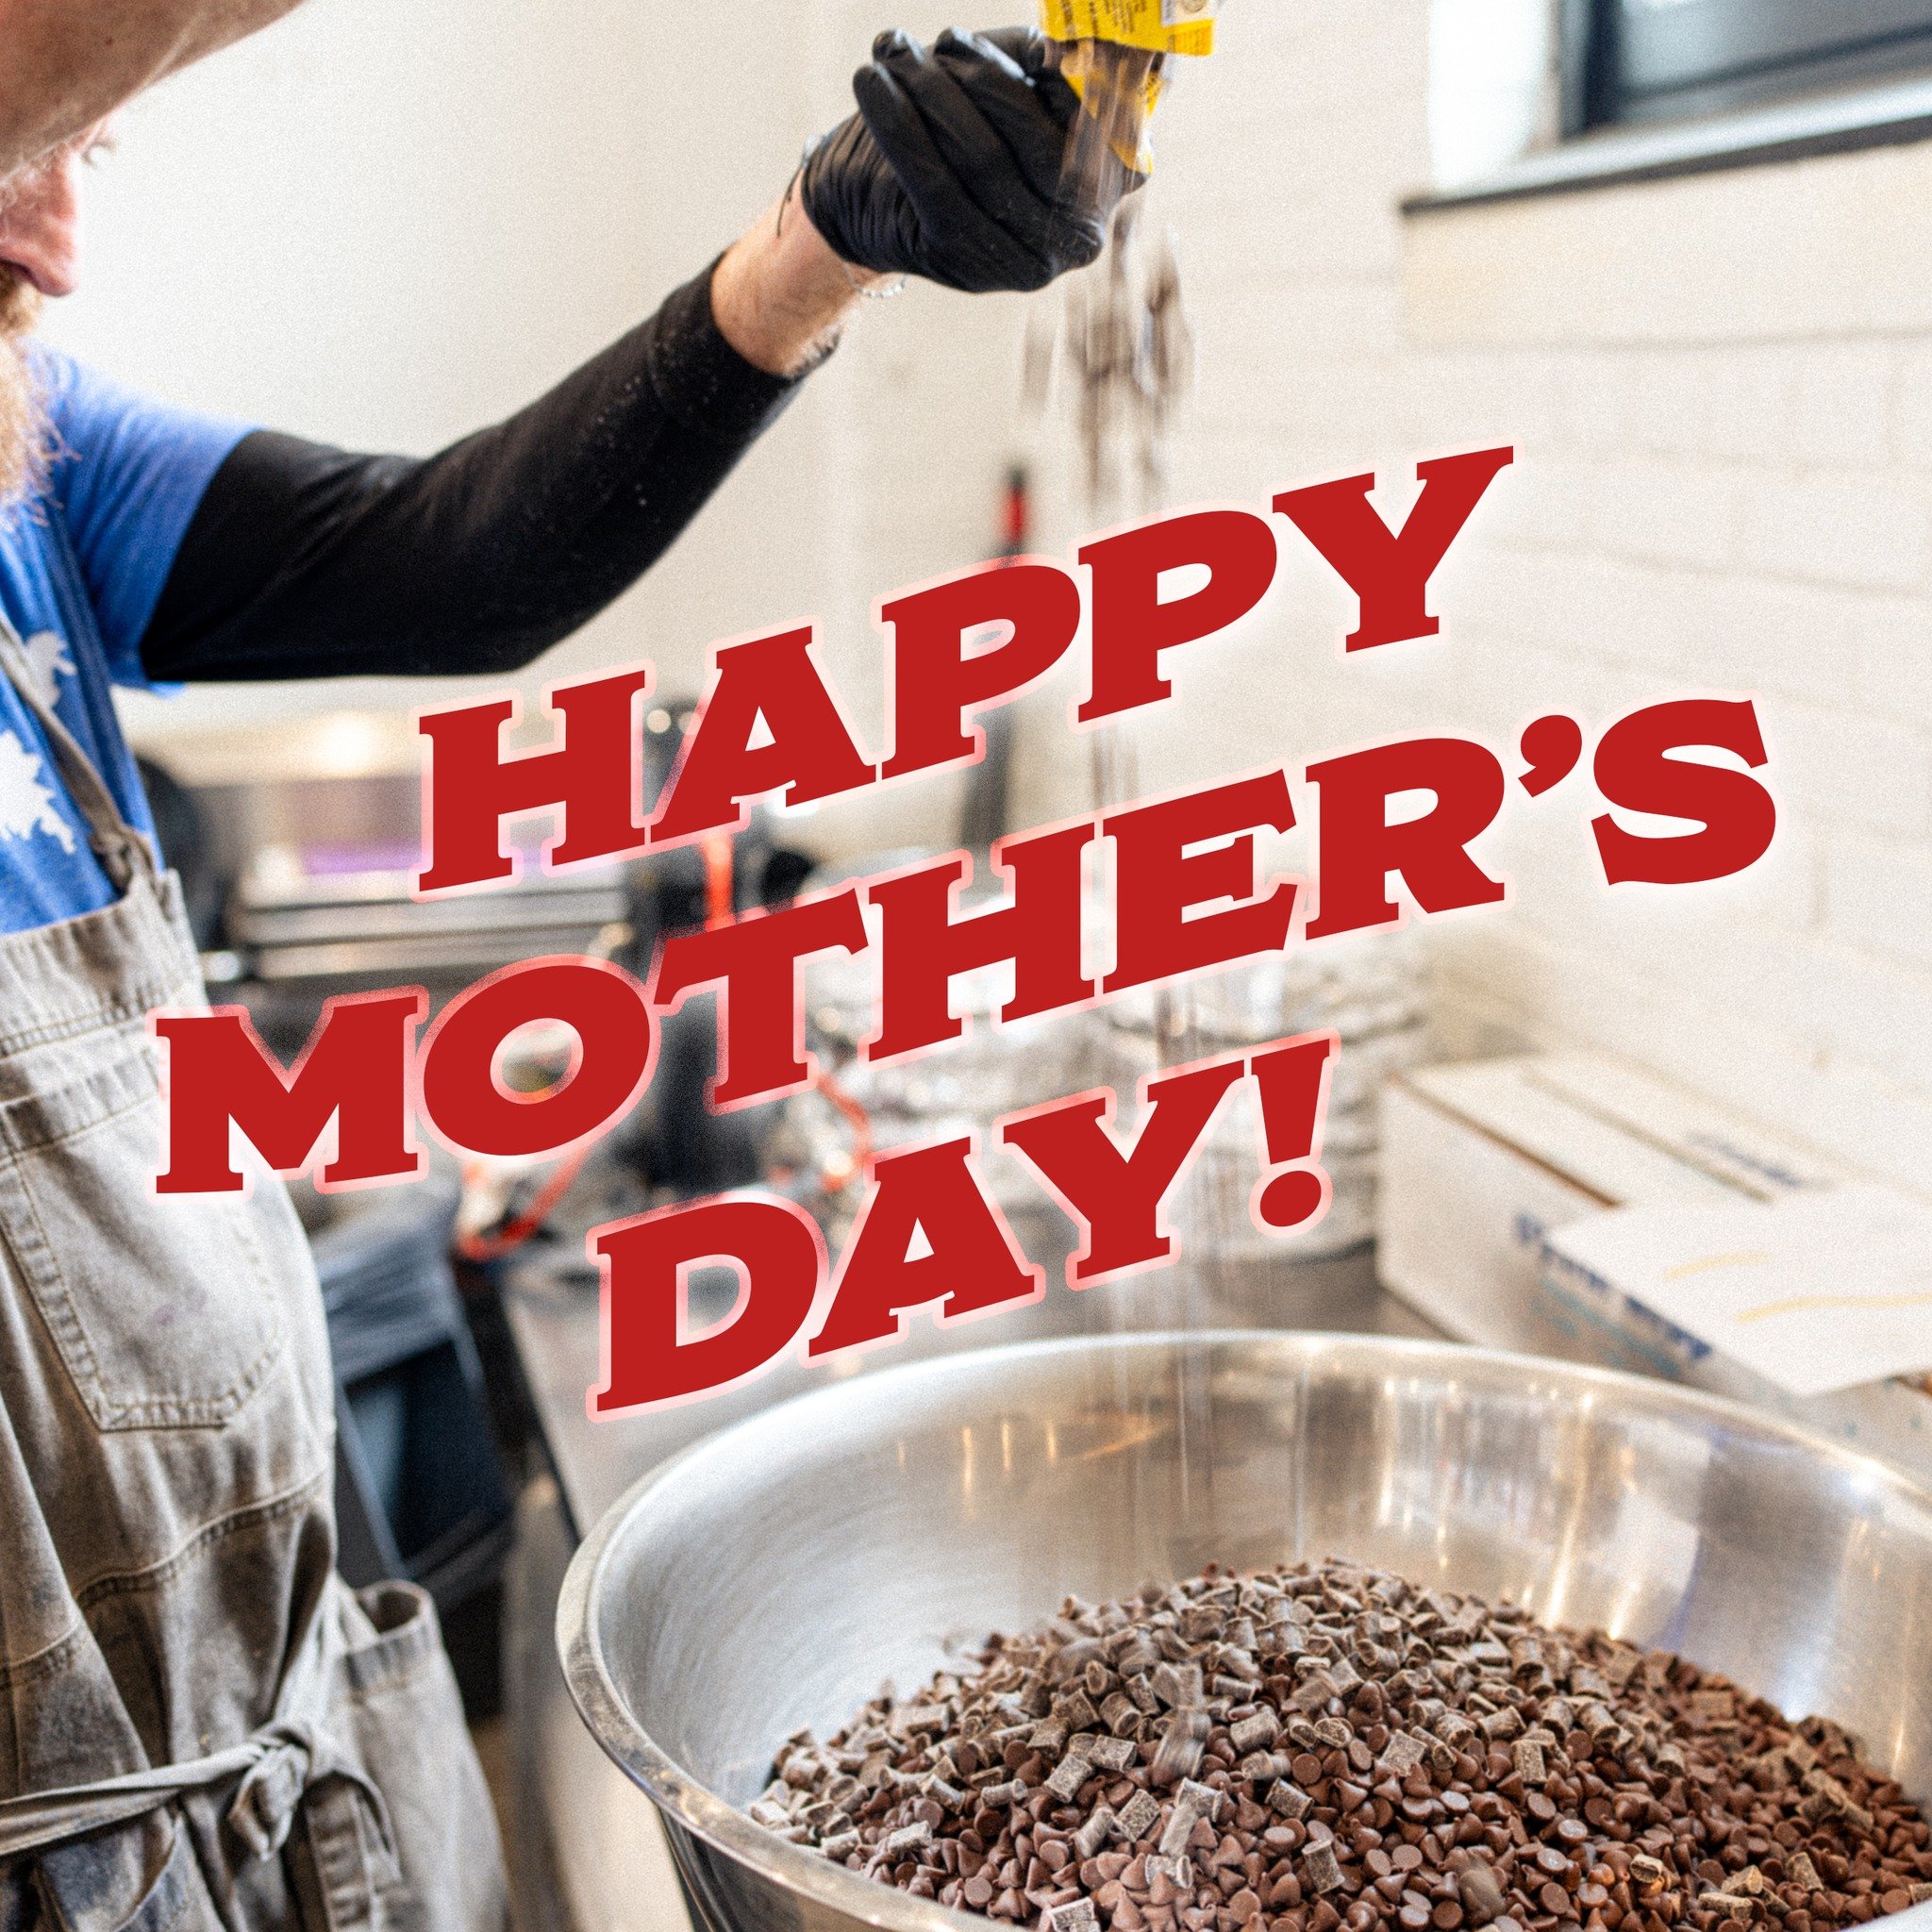 For all that you do, we want to send out a big THANK YOU to all the moms out there! ❤️ We hope you enjoy your day, and we hope that somebody in your life brings you to our bakery for some Mother's Day Cheesecake too! 😉

 #MothersDay #happymothersday